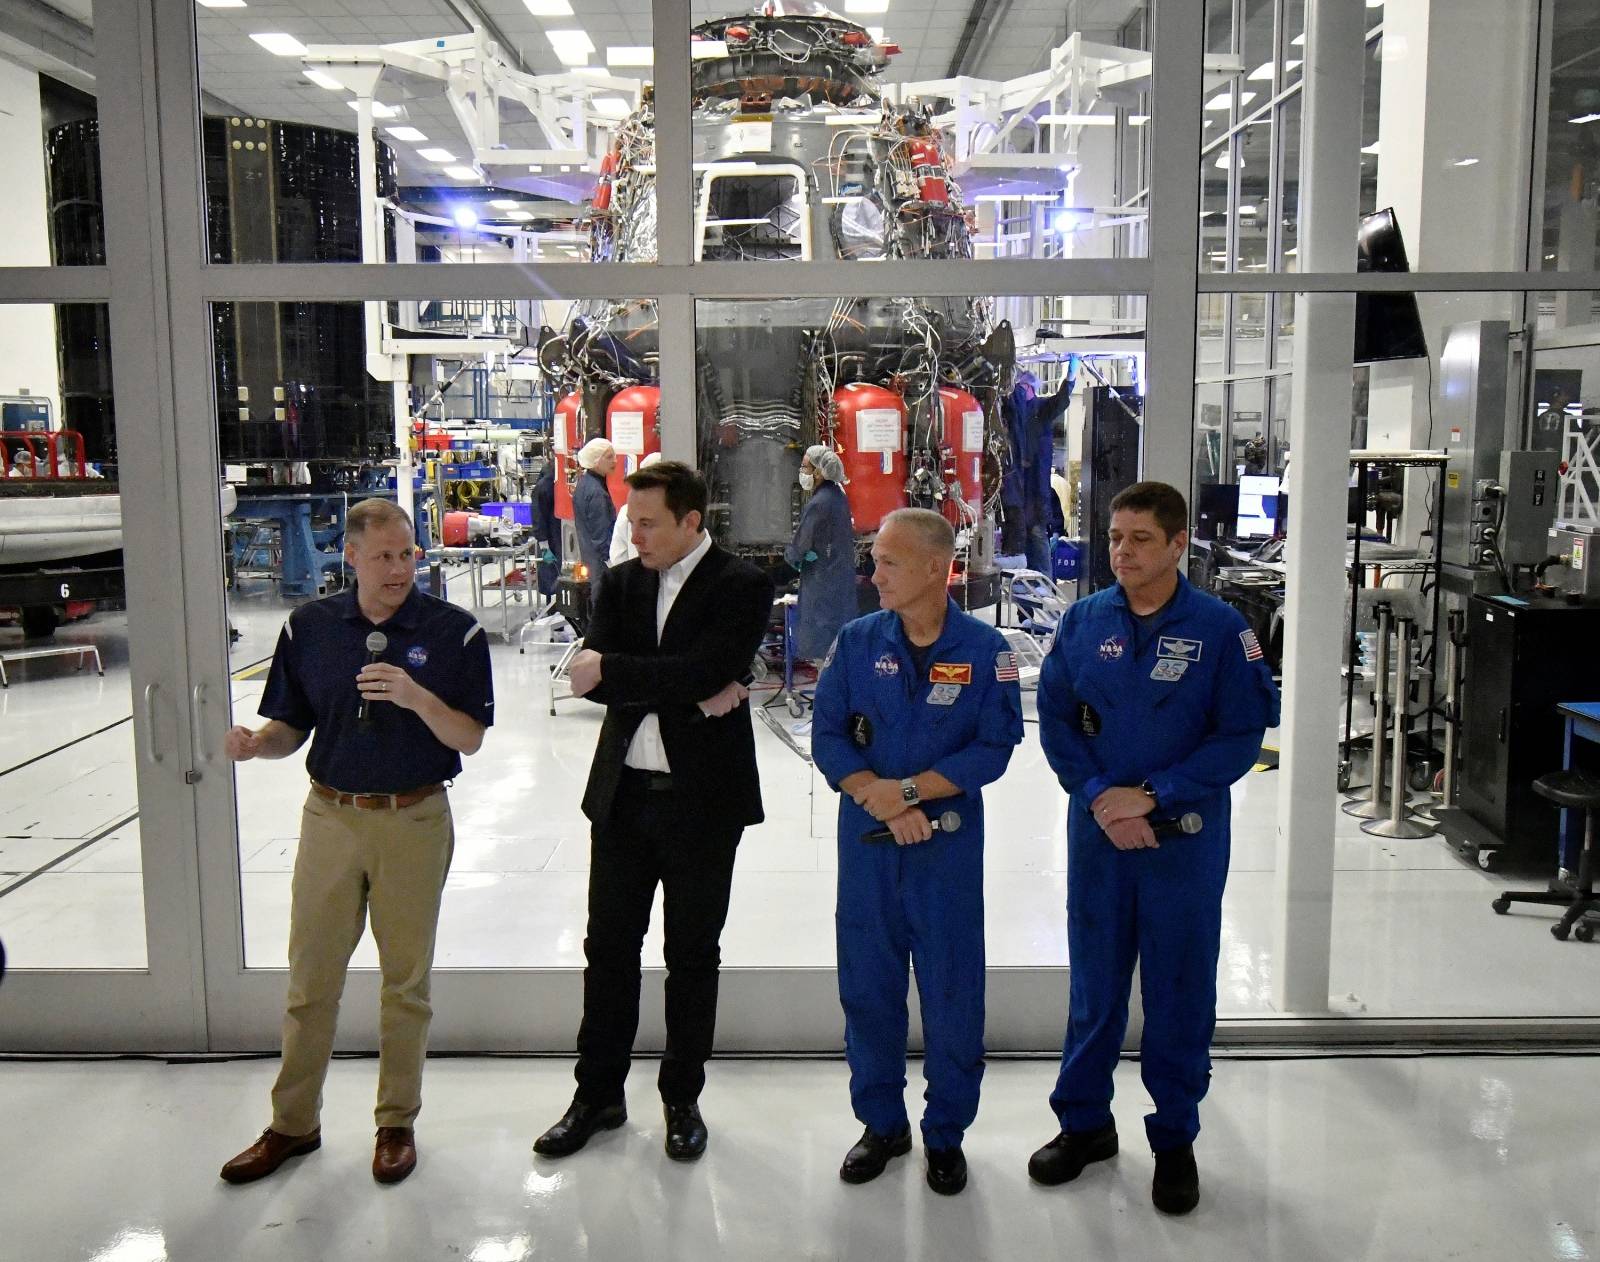 NASA Administrator Jim Bridenstine, SpaceX Chief Engineer Elon Musk, NASA astronauts Doug Hurley and Bob Behnken, take questions from the media after a tour of SpaceX headquarters in Hawthorne